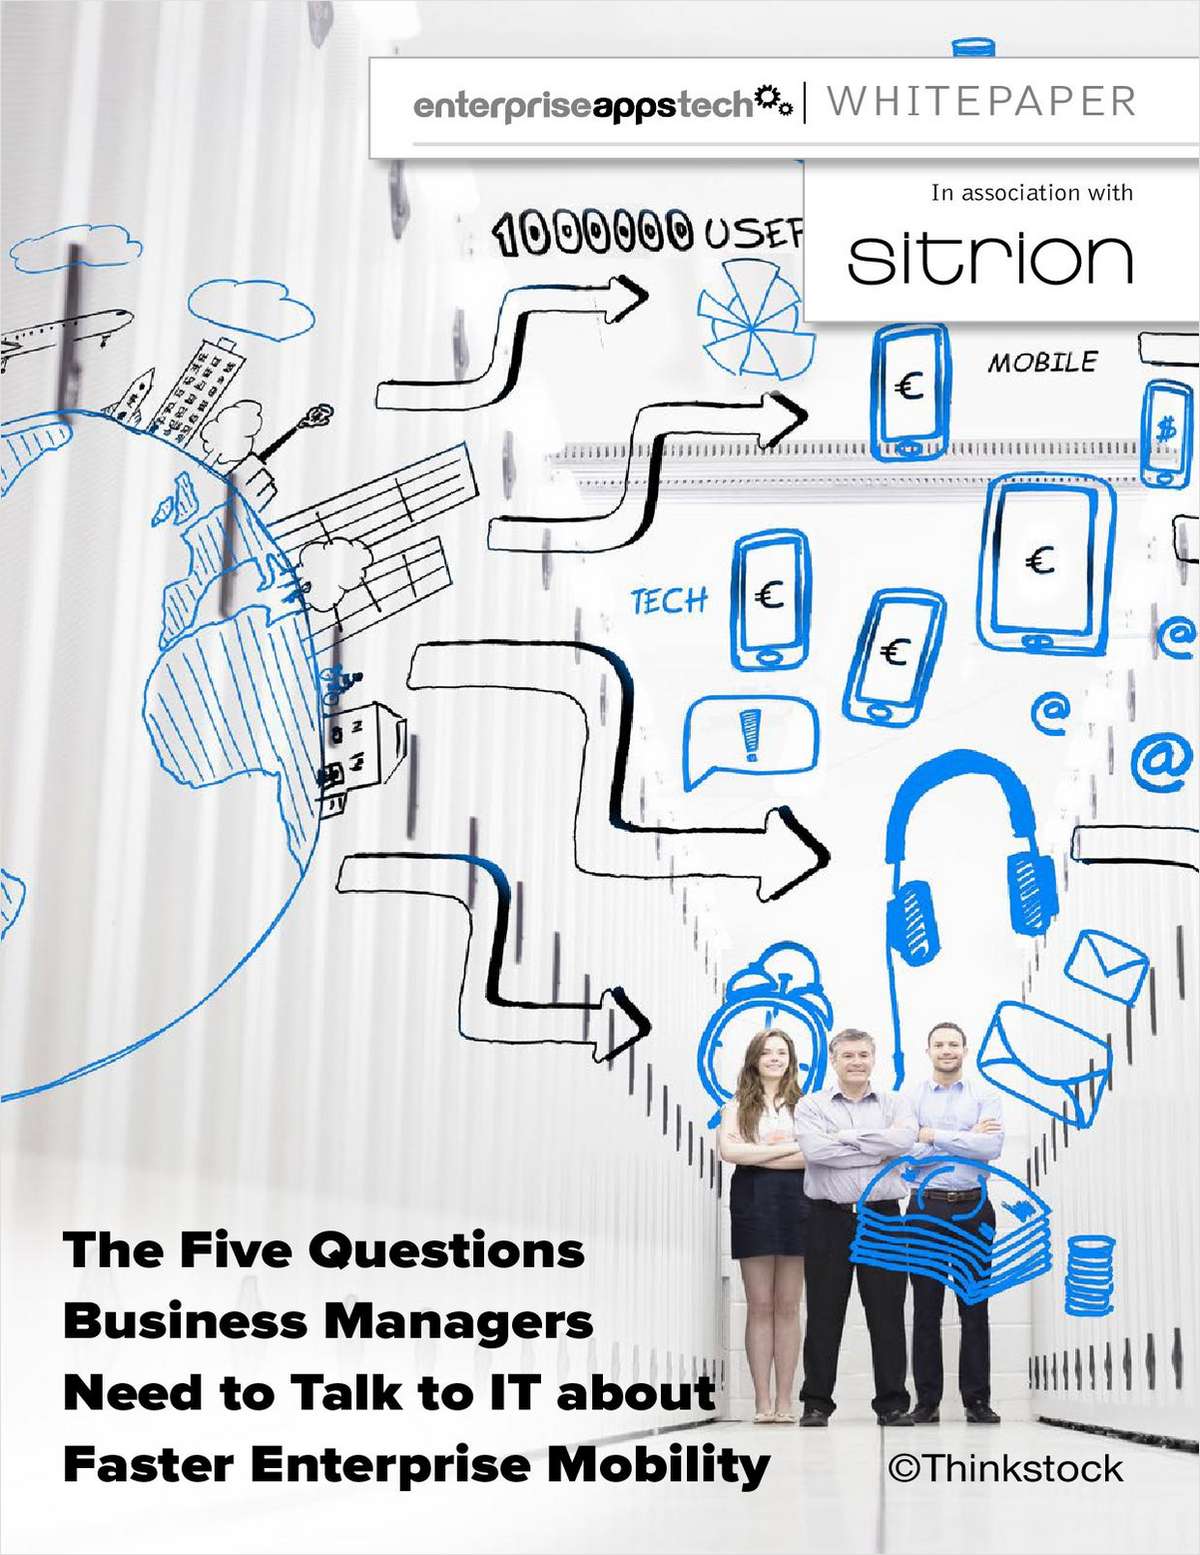 5 Questions Business Managers Need to Talk to IT about Faster Enterprise Mobility